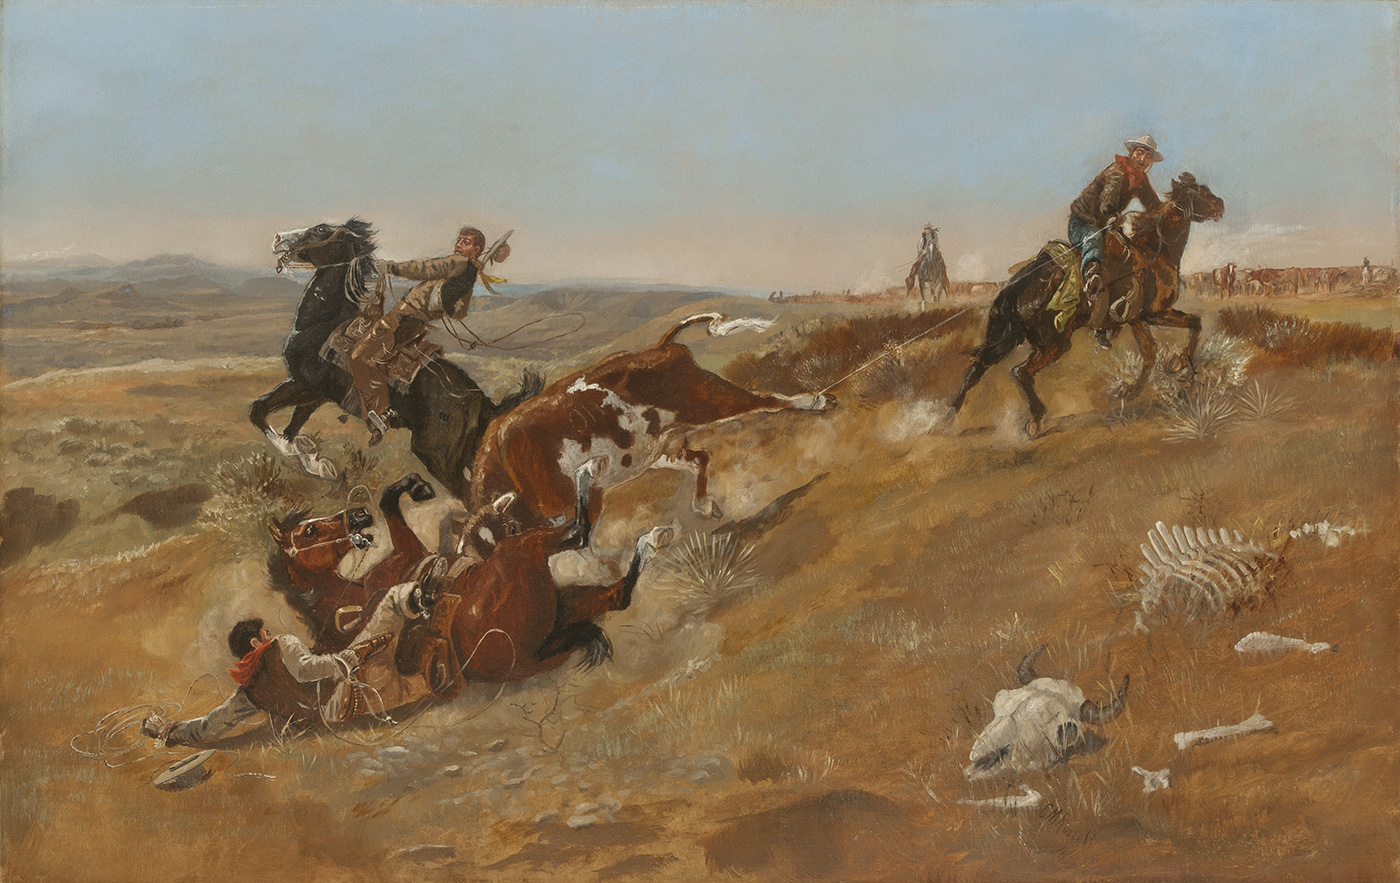 A cow knocks one of the herding cowboys and his horse to the ground.